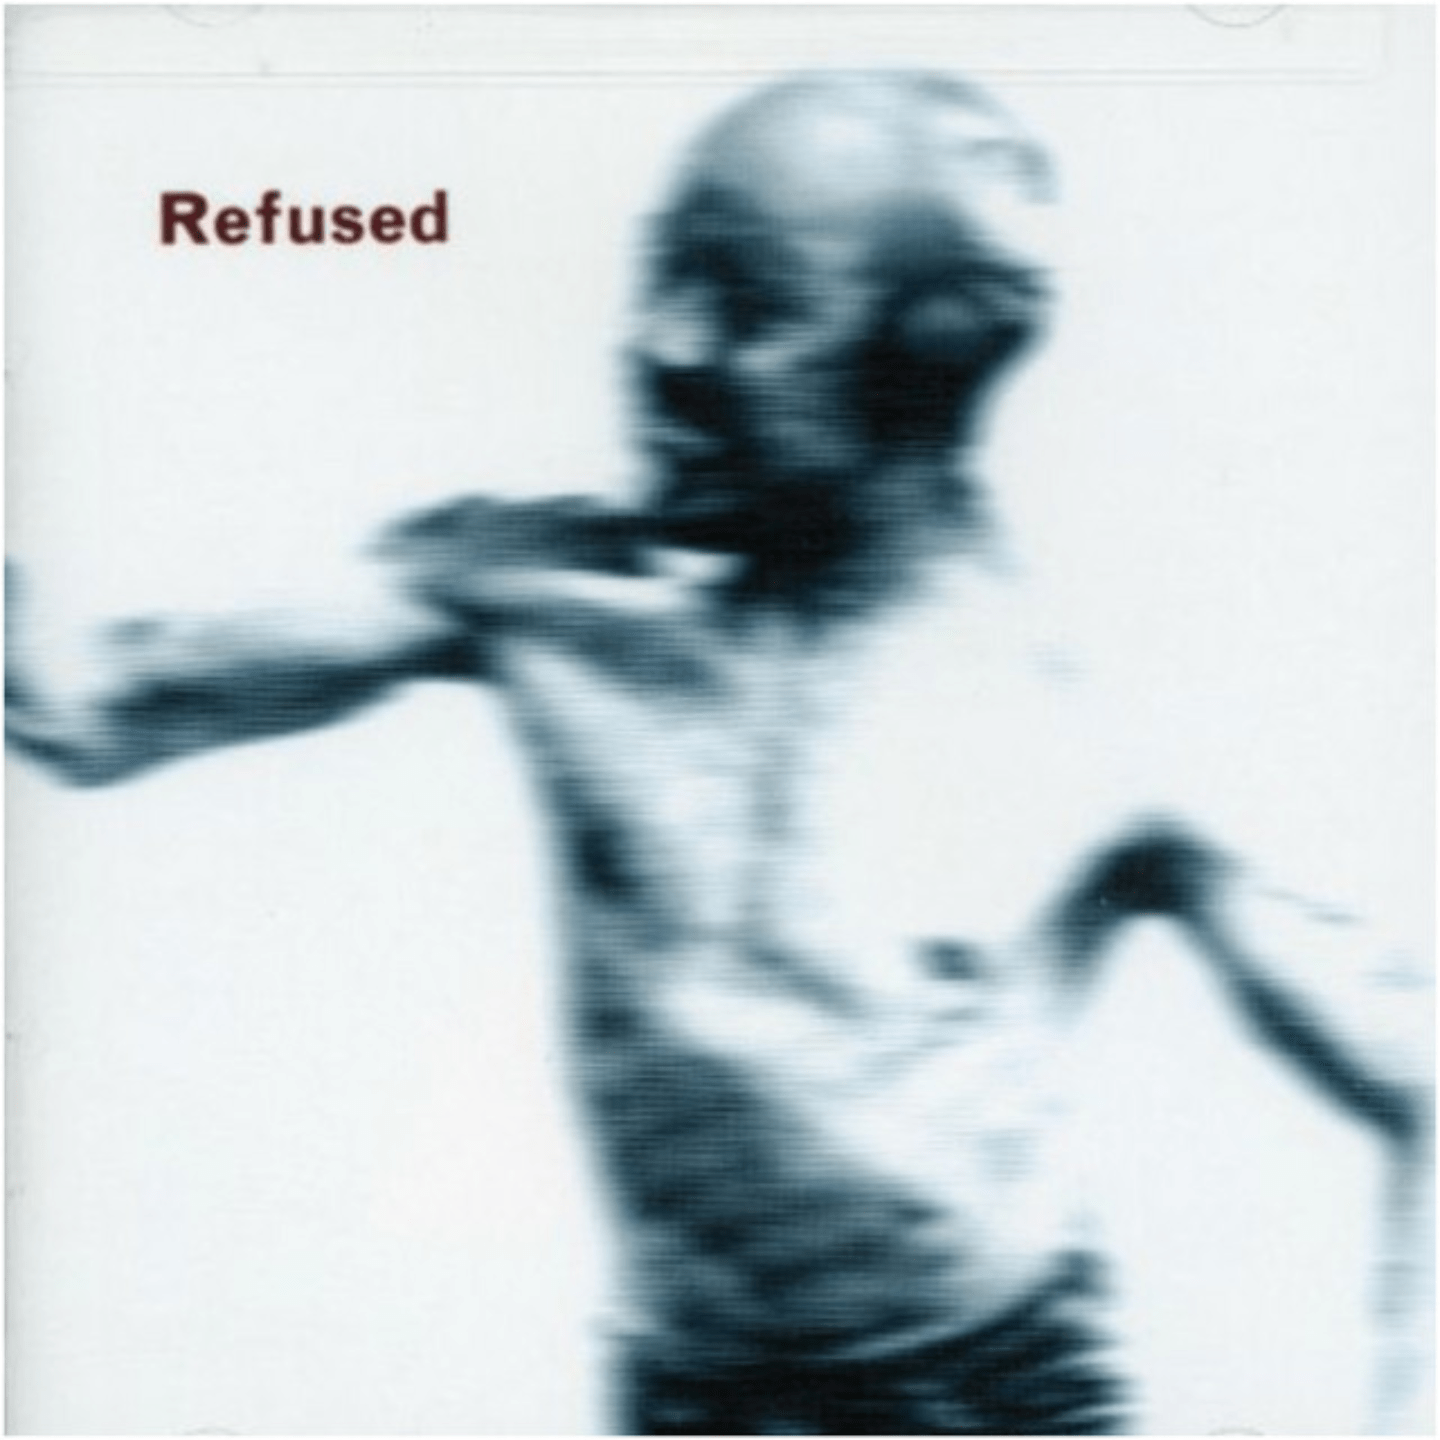 REFUSED - Songs to Fan the Flames of Discontent 2xLP